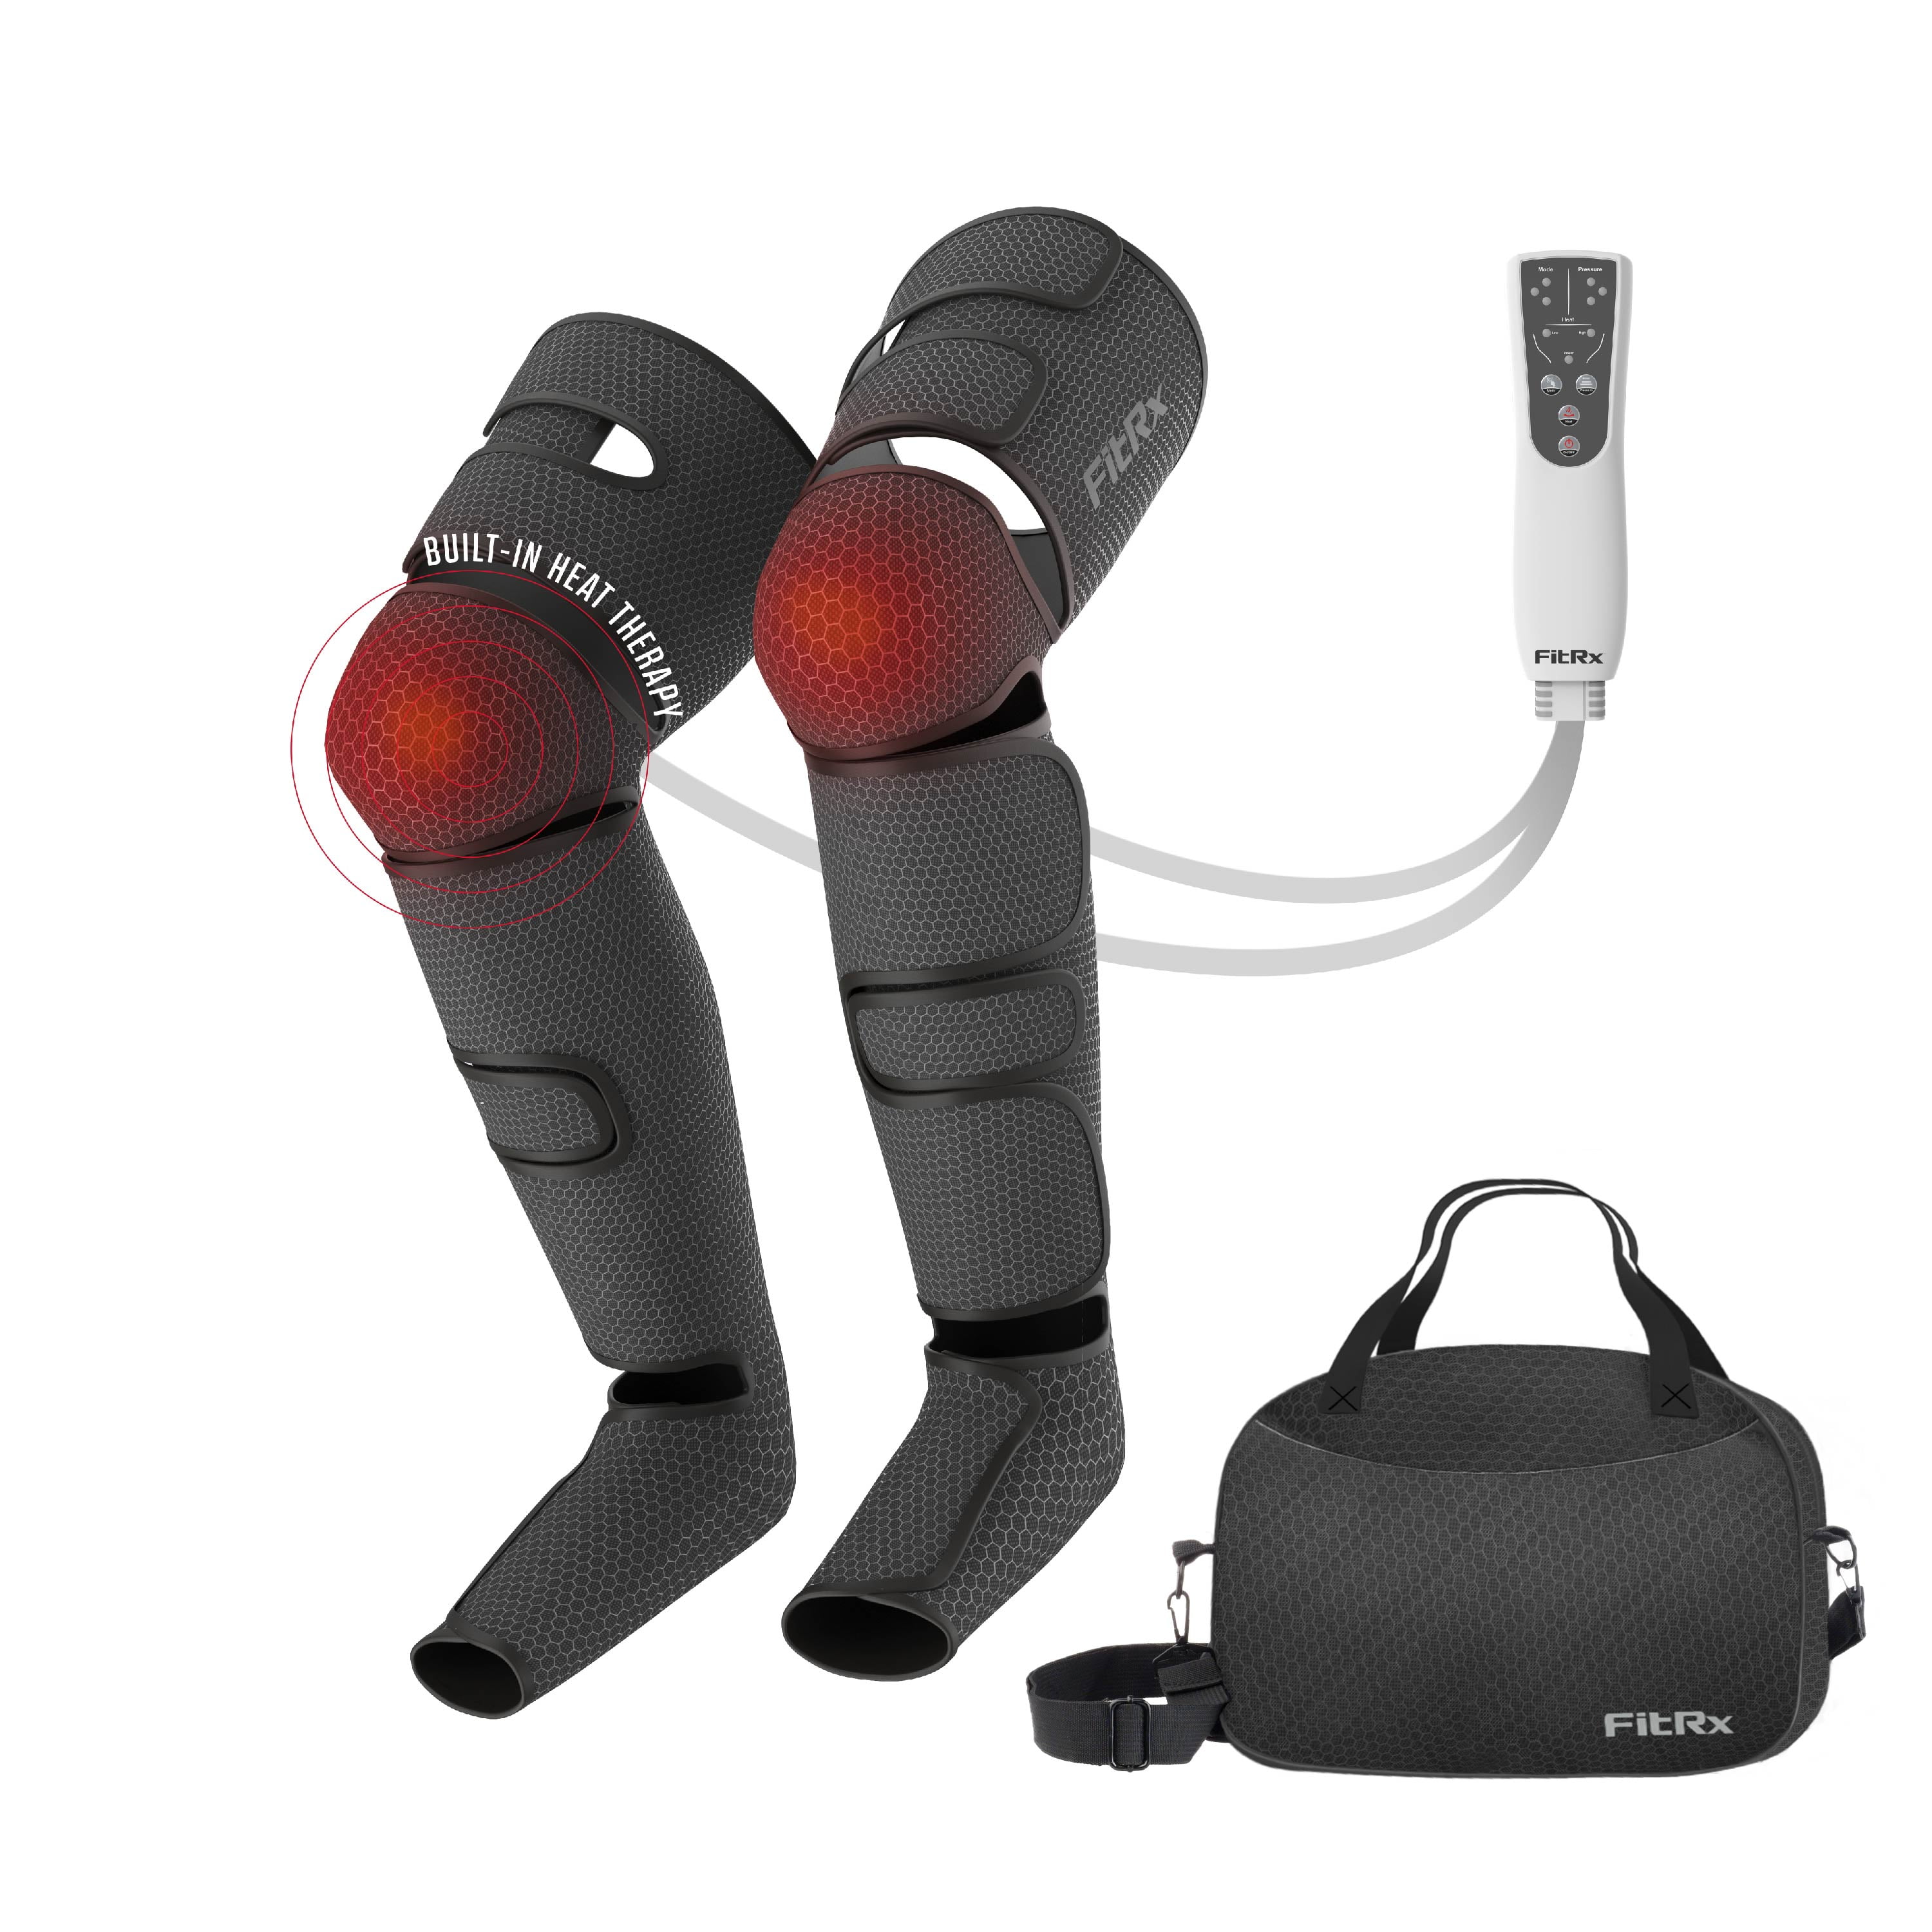 FitRx RecoverMax, Heated Compression Leg and Foot Massager with Multiple Massage, Intensity, and Heat Levels